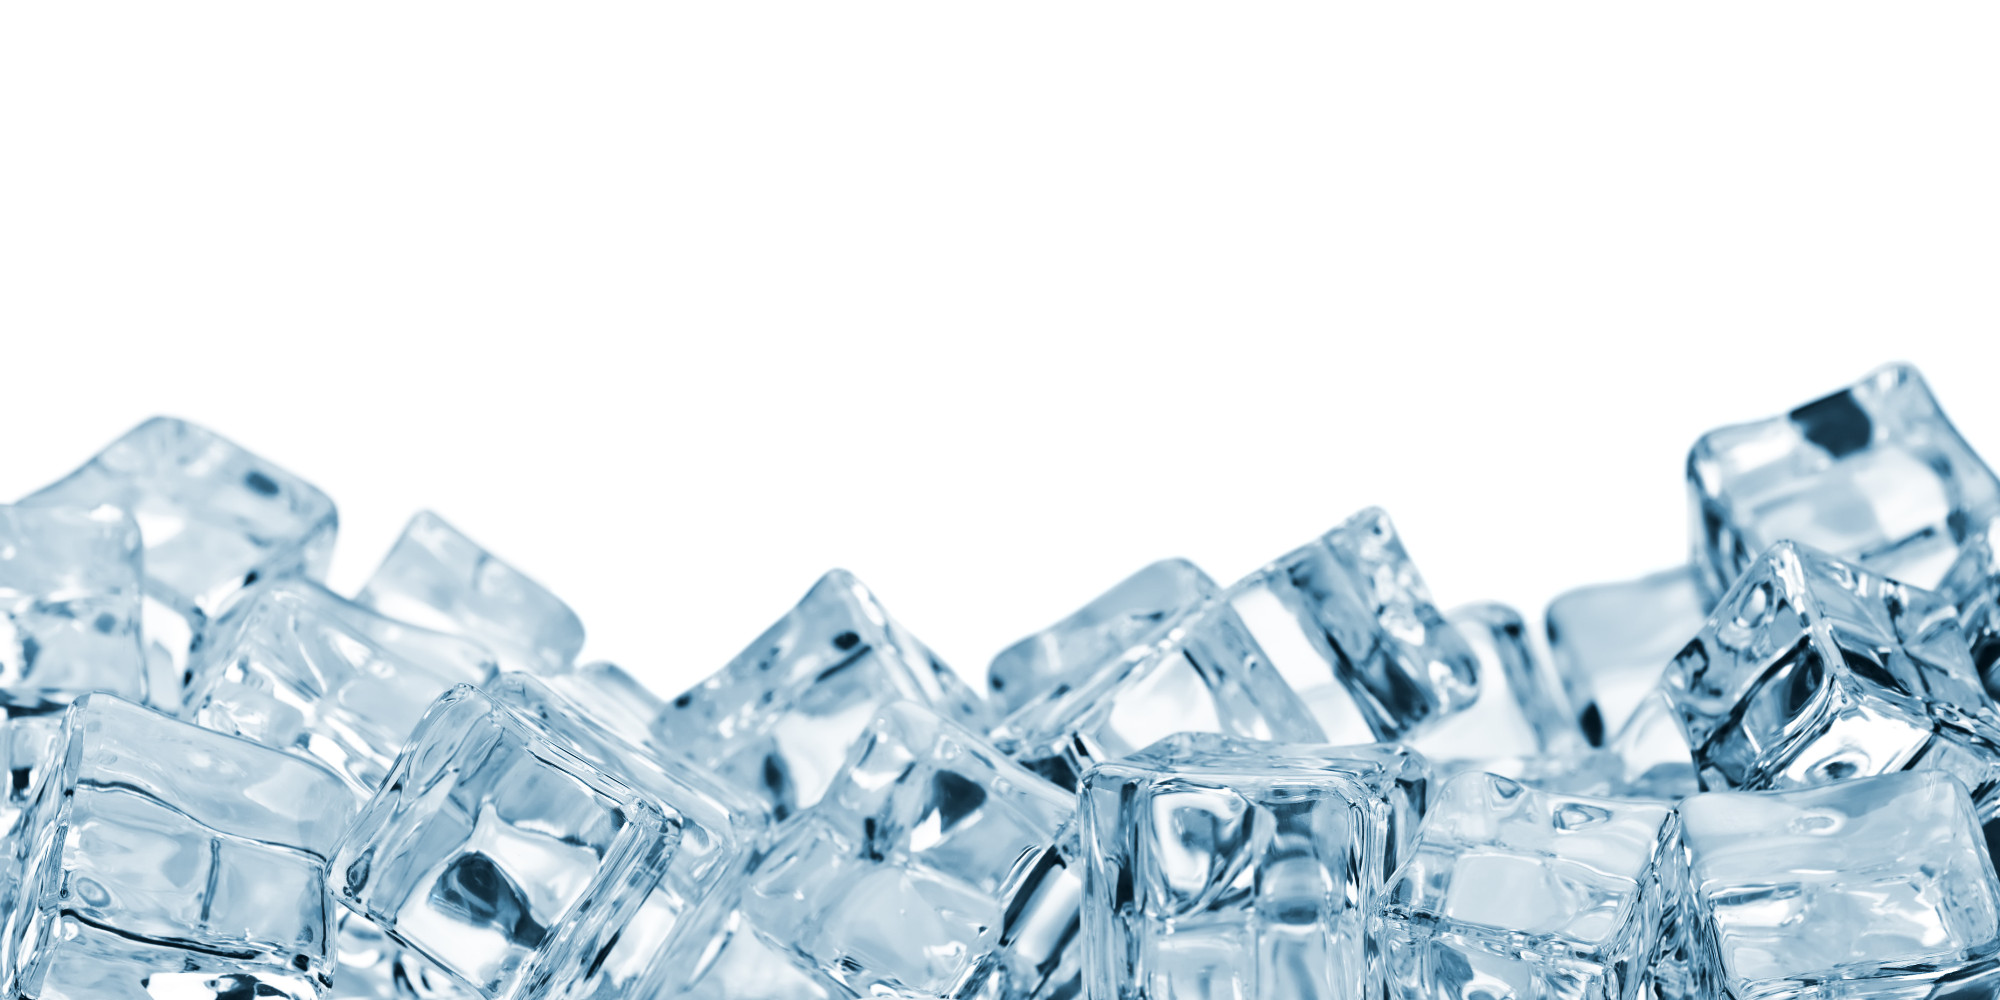 High Resolution Wallpaper | Ice Cubes 2000x1000 px